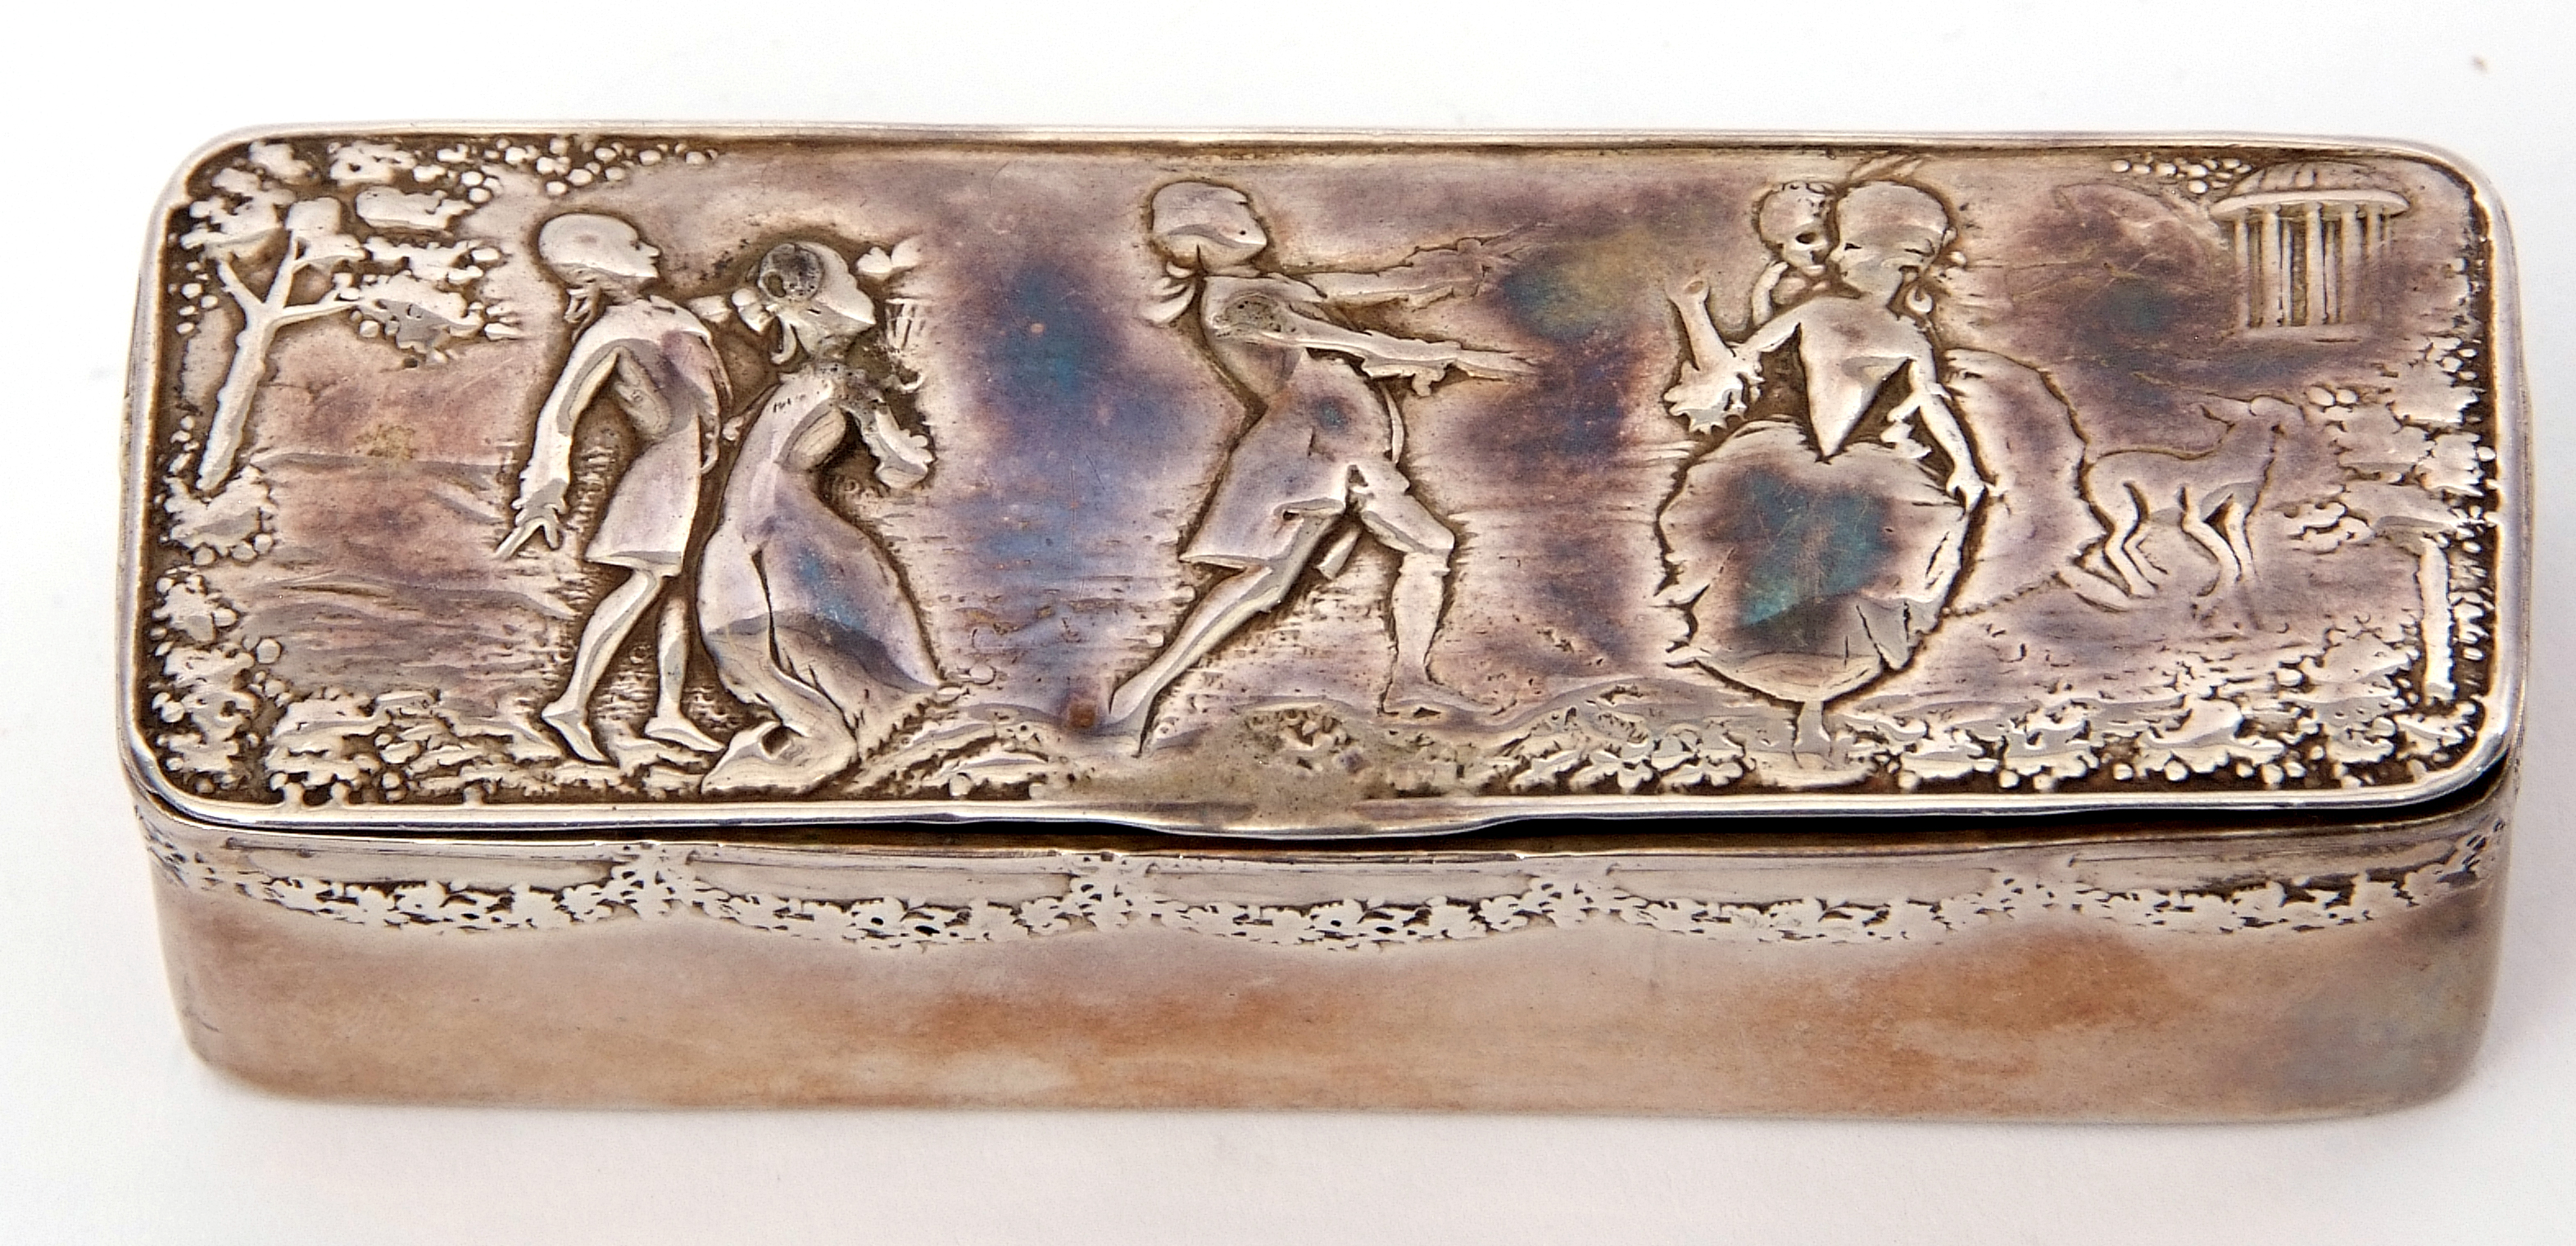 Edwardian period import hallmarked silver encased ring box, the lid embossed with romantic